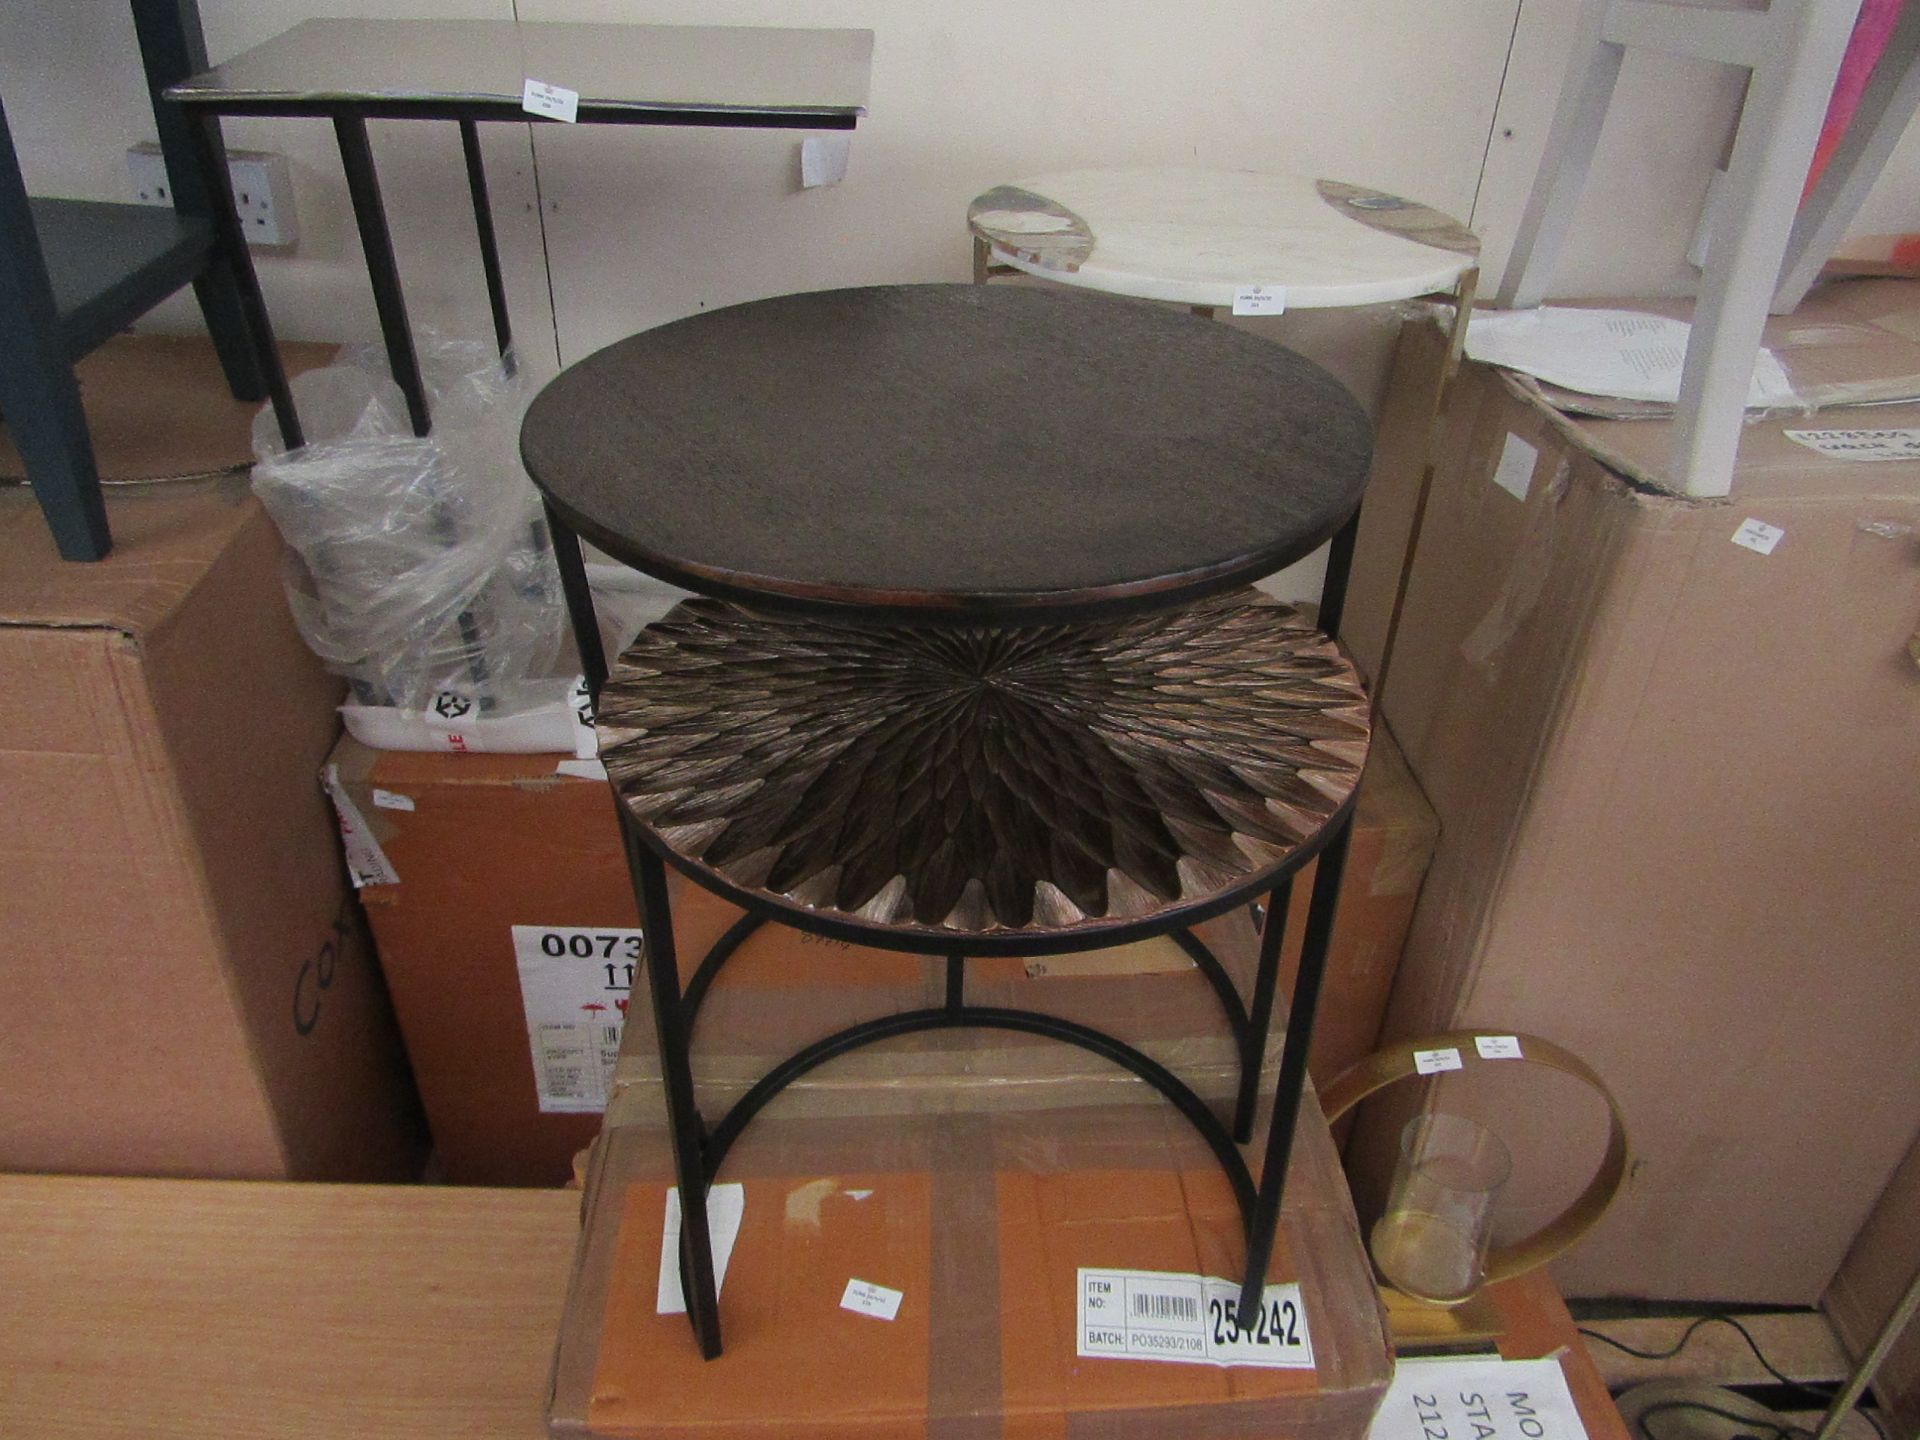 1 x Moot Group Limosa Side Tables RRP £185.00 SKU MOO-DIR-5055999251242 TOTAL RRP £185 This lot is a